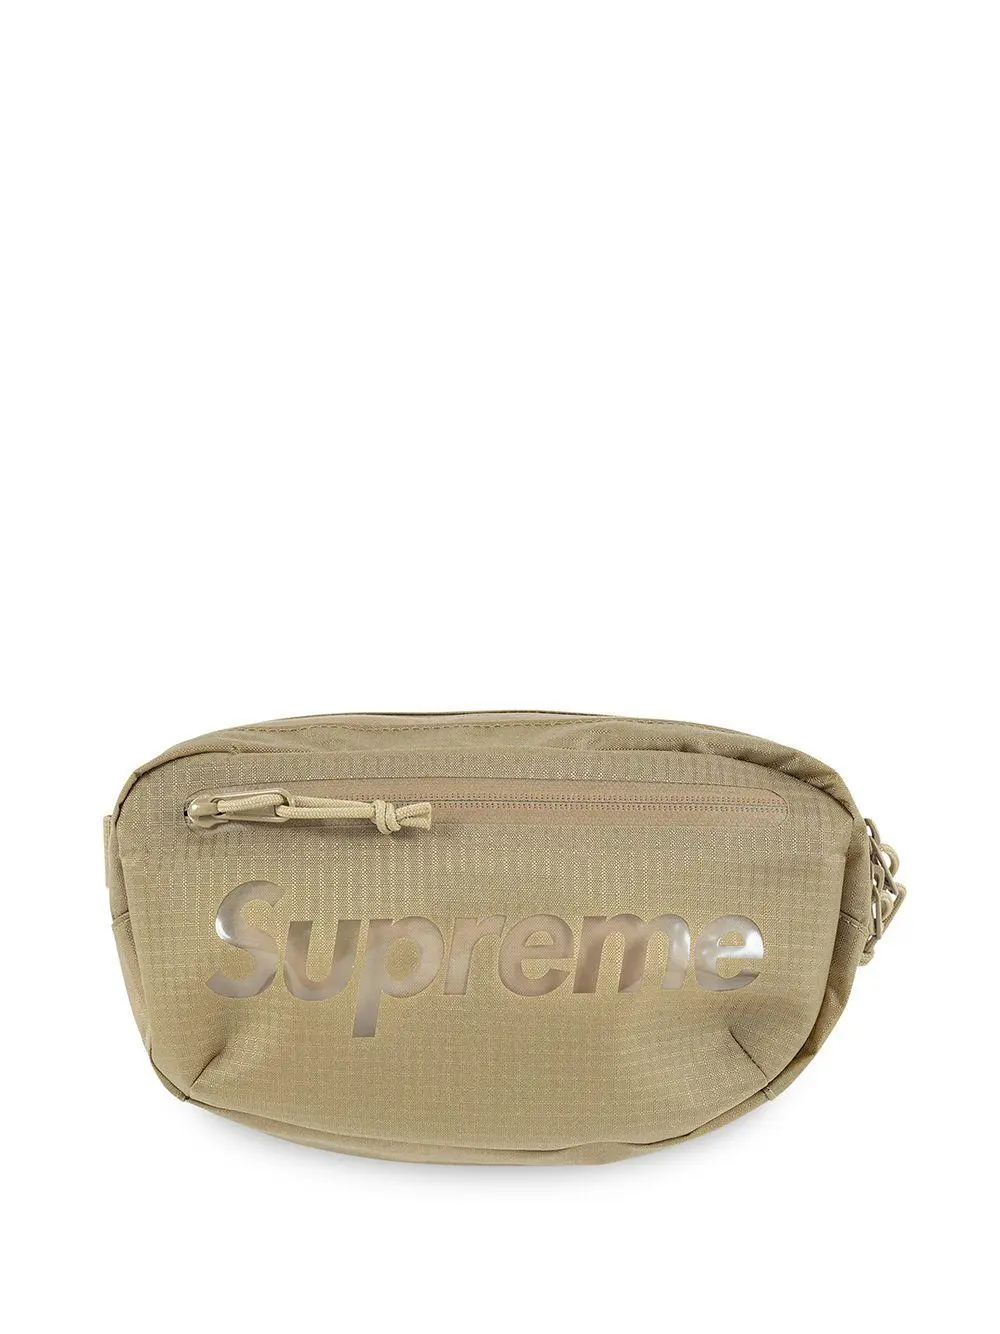 Compare Prices for logo waist bag - unisex - Polyester - One Size -  Neutrals - SUPREME | Stylight